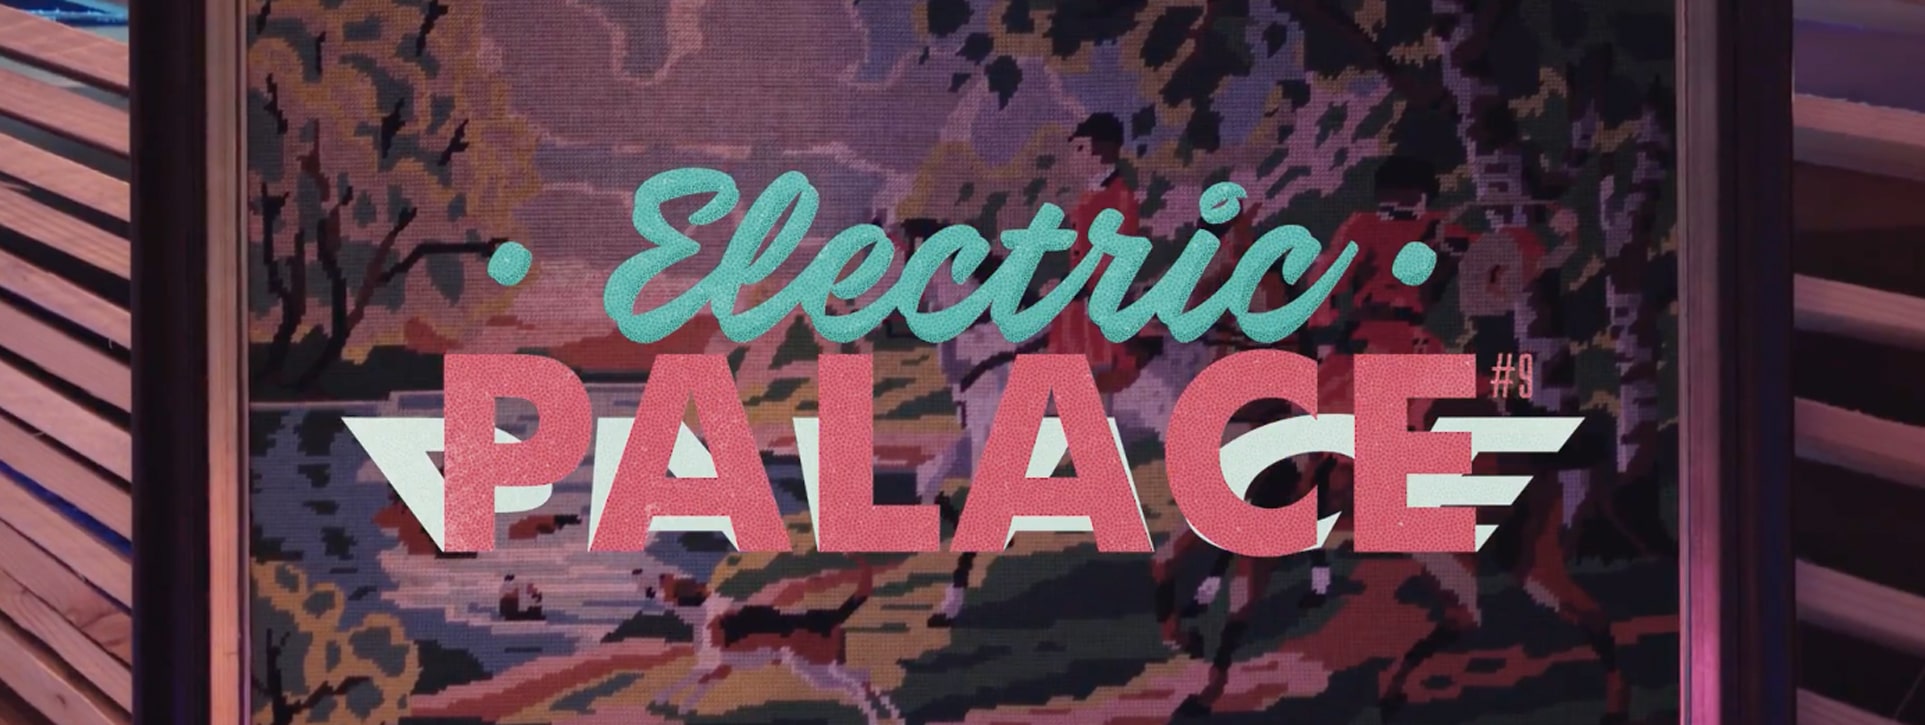 Electric Palace #9 - Riot House